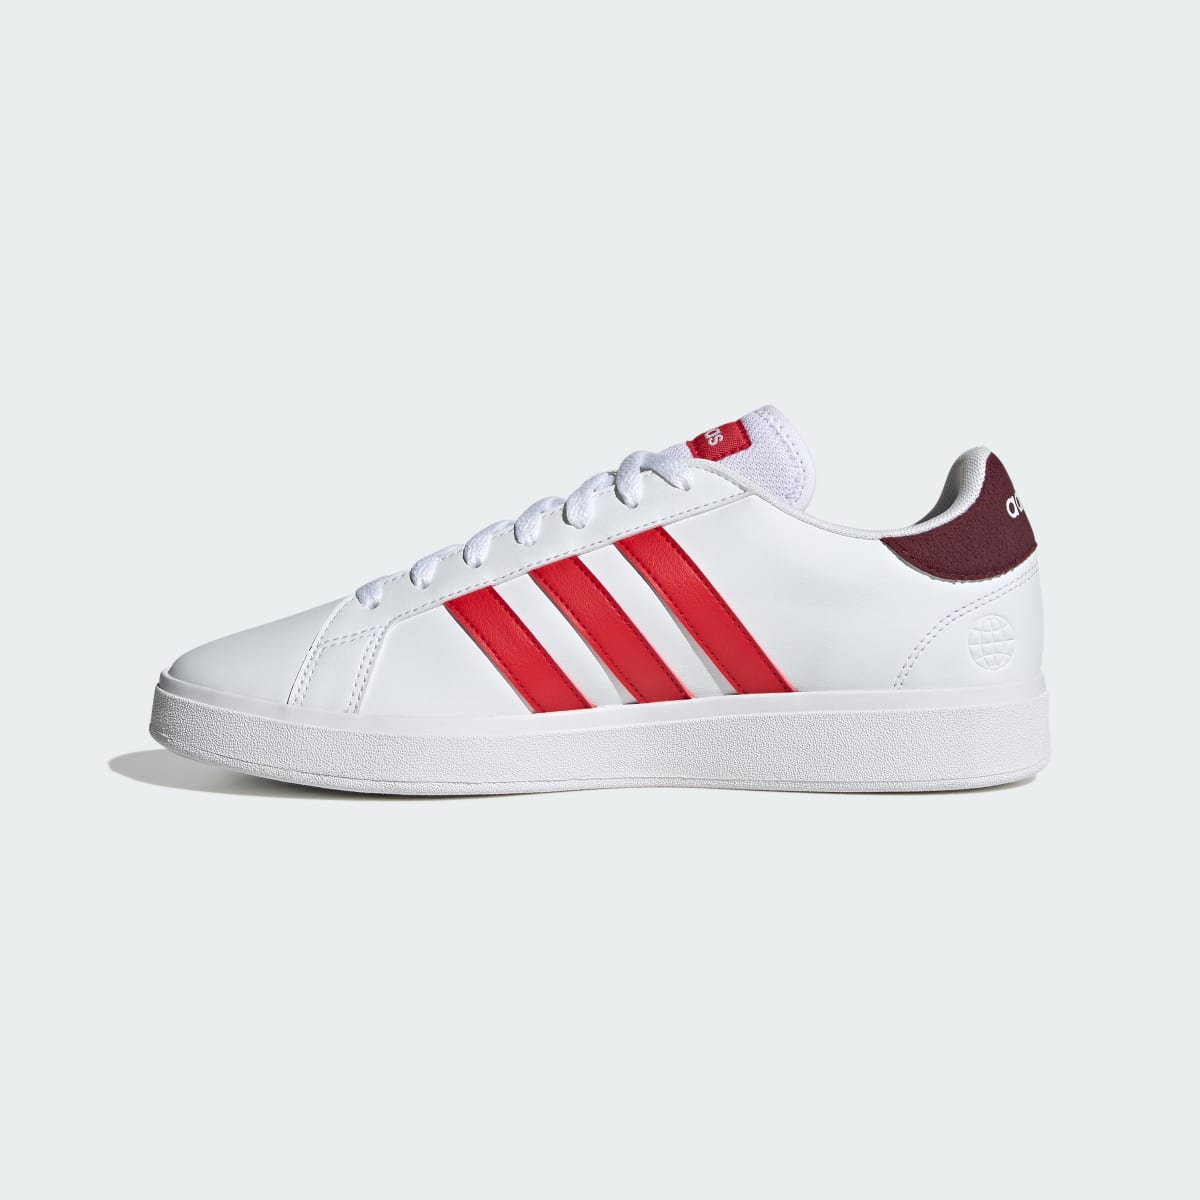 Adidas Grand Court TD Lifestyle Court Casual Shoes. 7